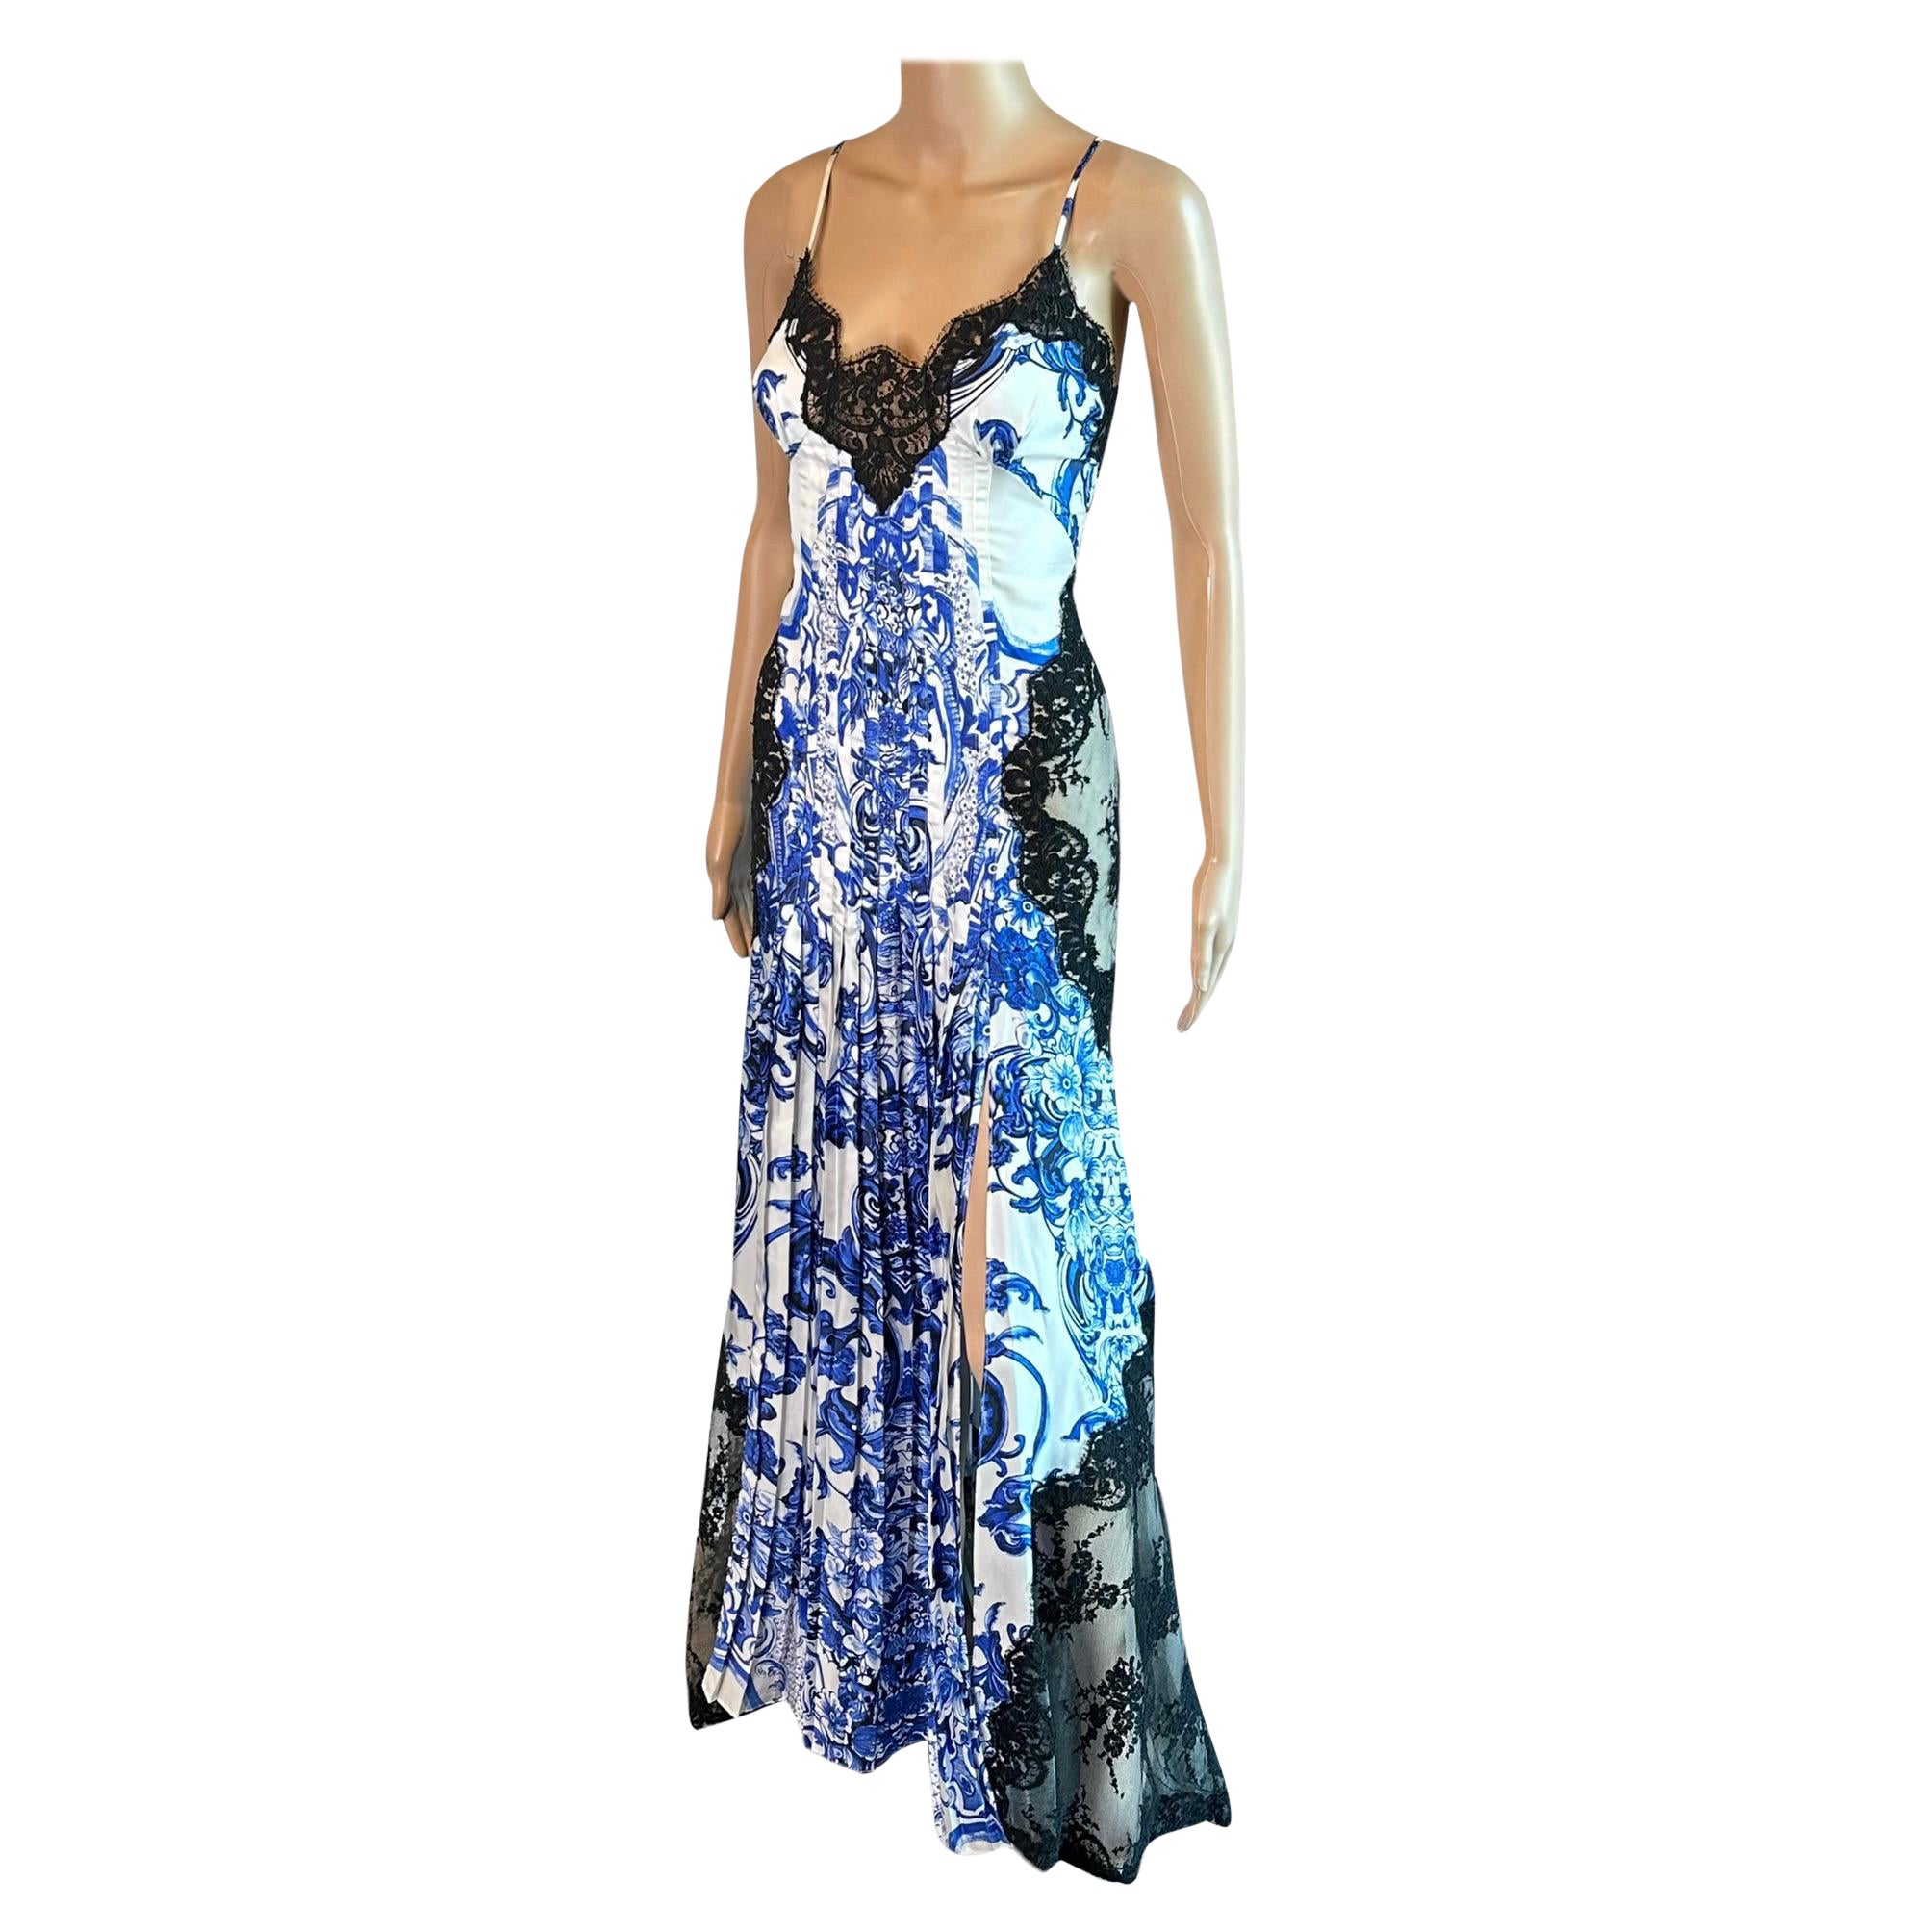 Roberto Cavalli Resort 2013 Chinoiserie Ming Porcelain Sheer Lace Evening Dress For Sale